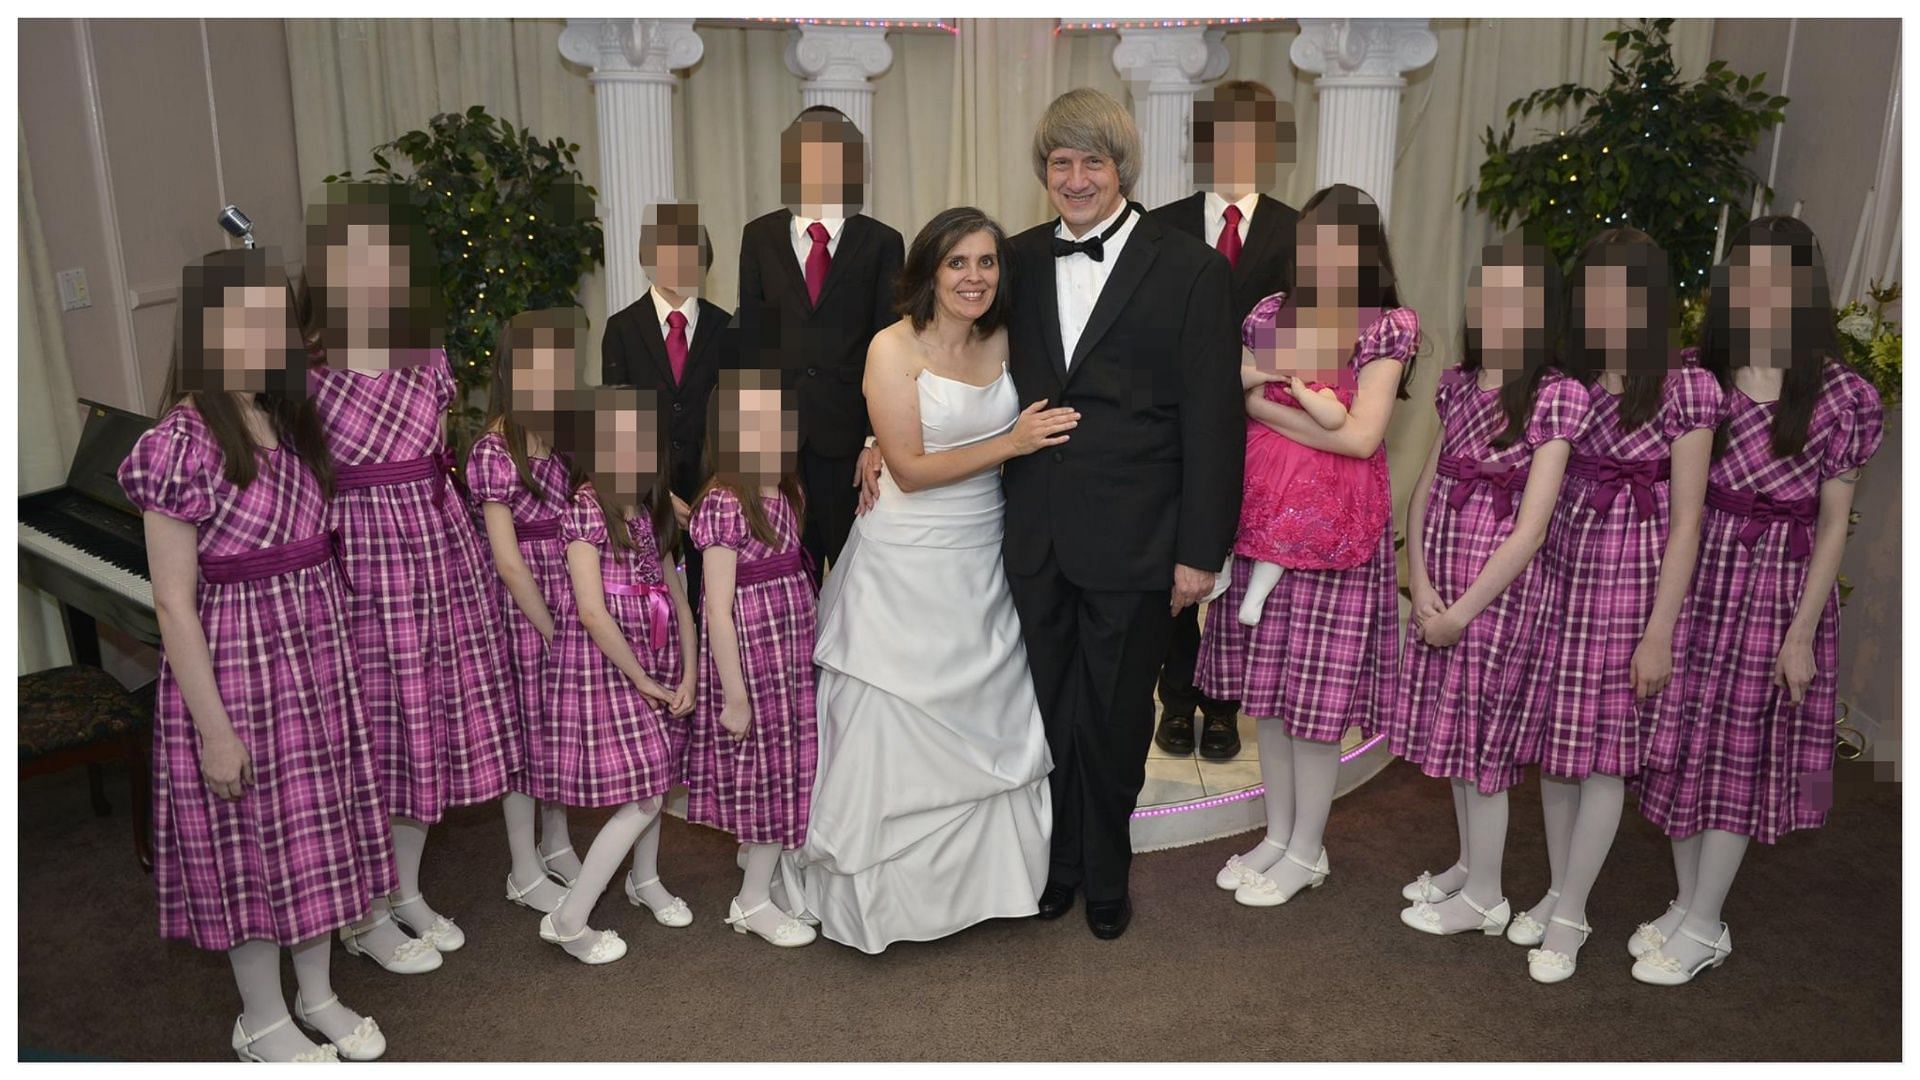 The Turpin siblings are allegedly facing further issues within the foster care system (Image via Louise Turpin/Facebook)